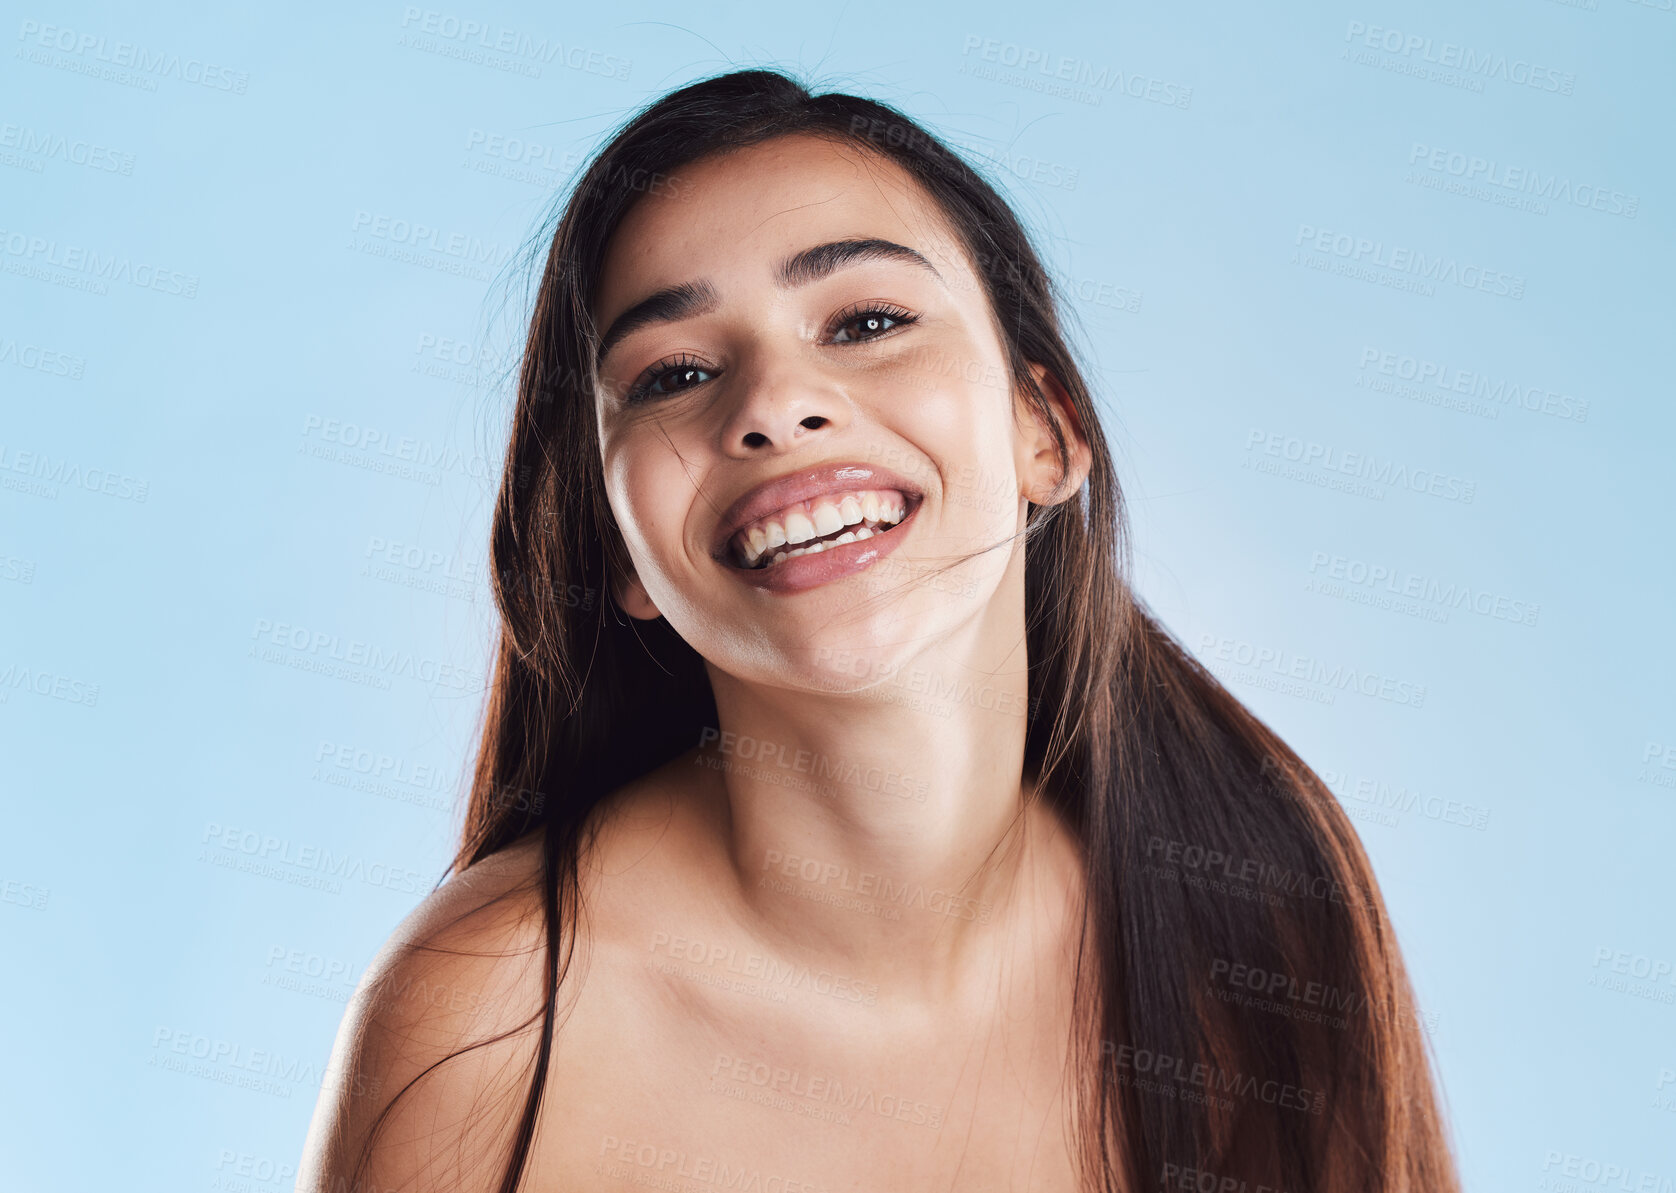 Buy stock photo Portrait of one beautiful young hispanic woman with healthy skin and sleek long hair smiling against a blue studio background. Happy mixed race model with flawless complexion and natural beauty